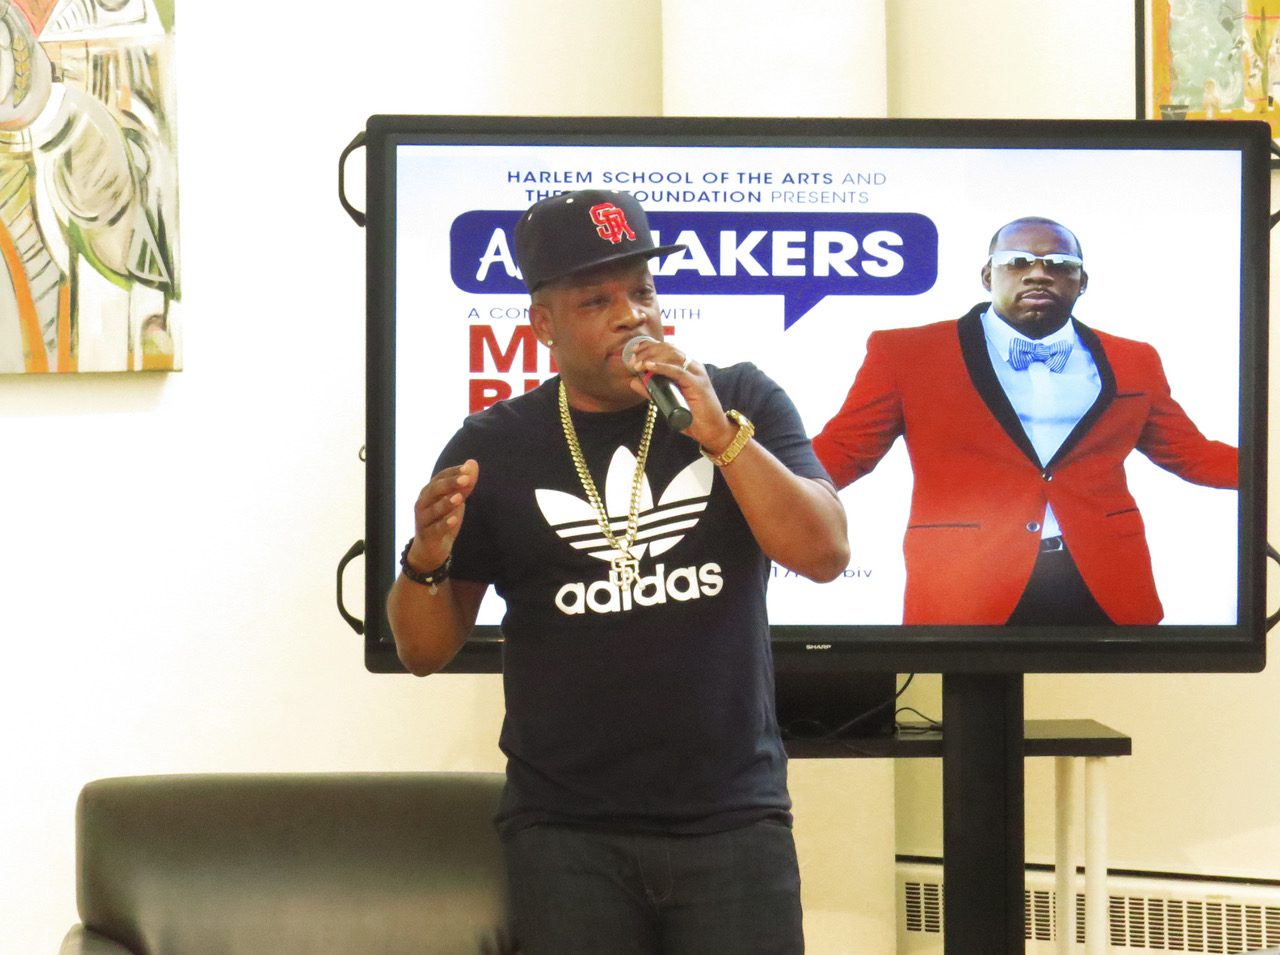 Michael Bivins speaking at Harlem School of the Arts. (Photo courtesy of Brian McCray/Harlem School of the Arts)